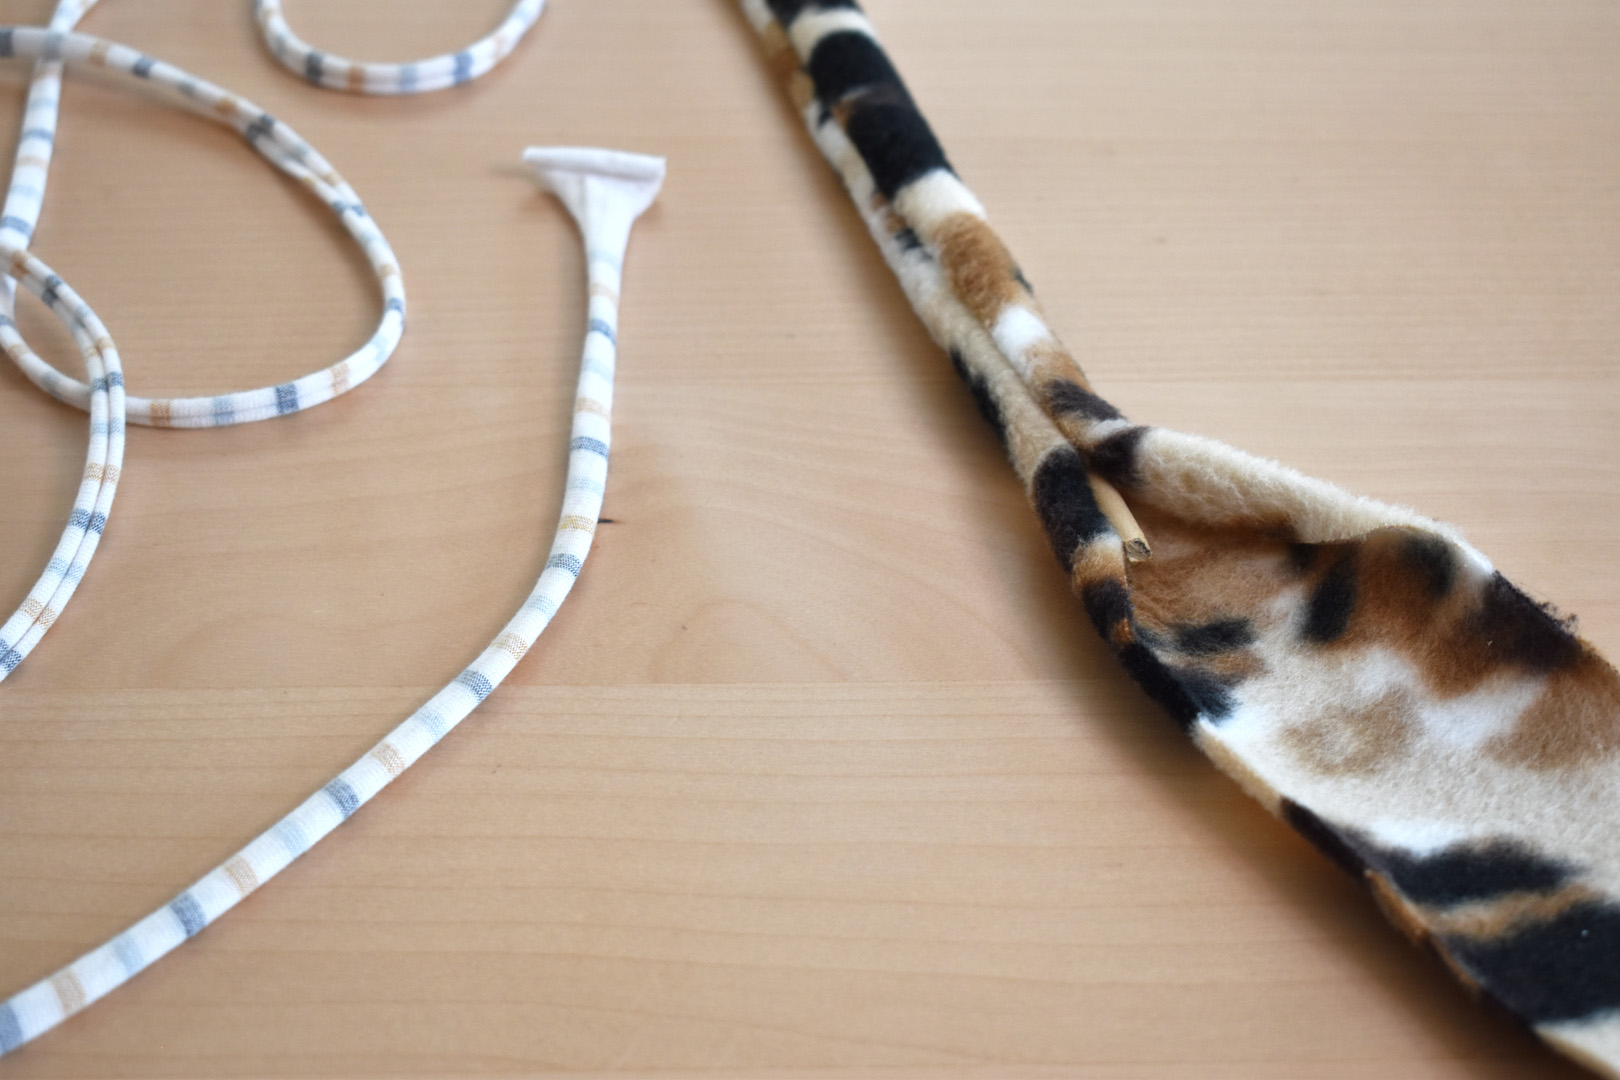 Cat Friendly Wand Toy Tutorial by Erika Mulvenna